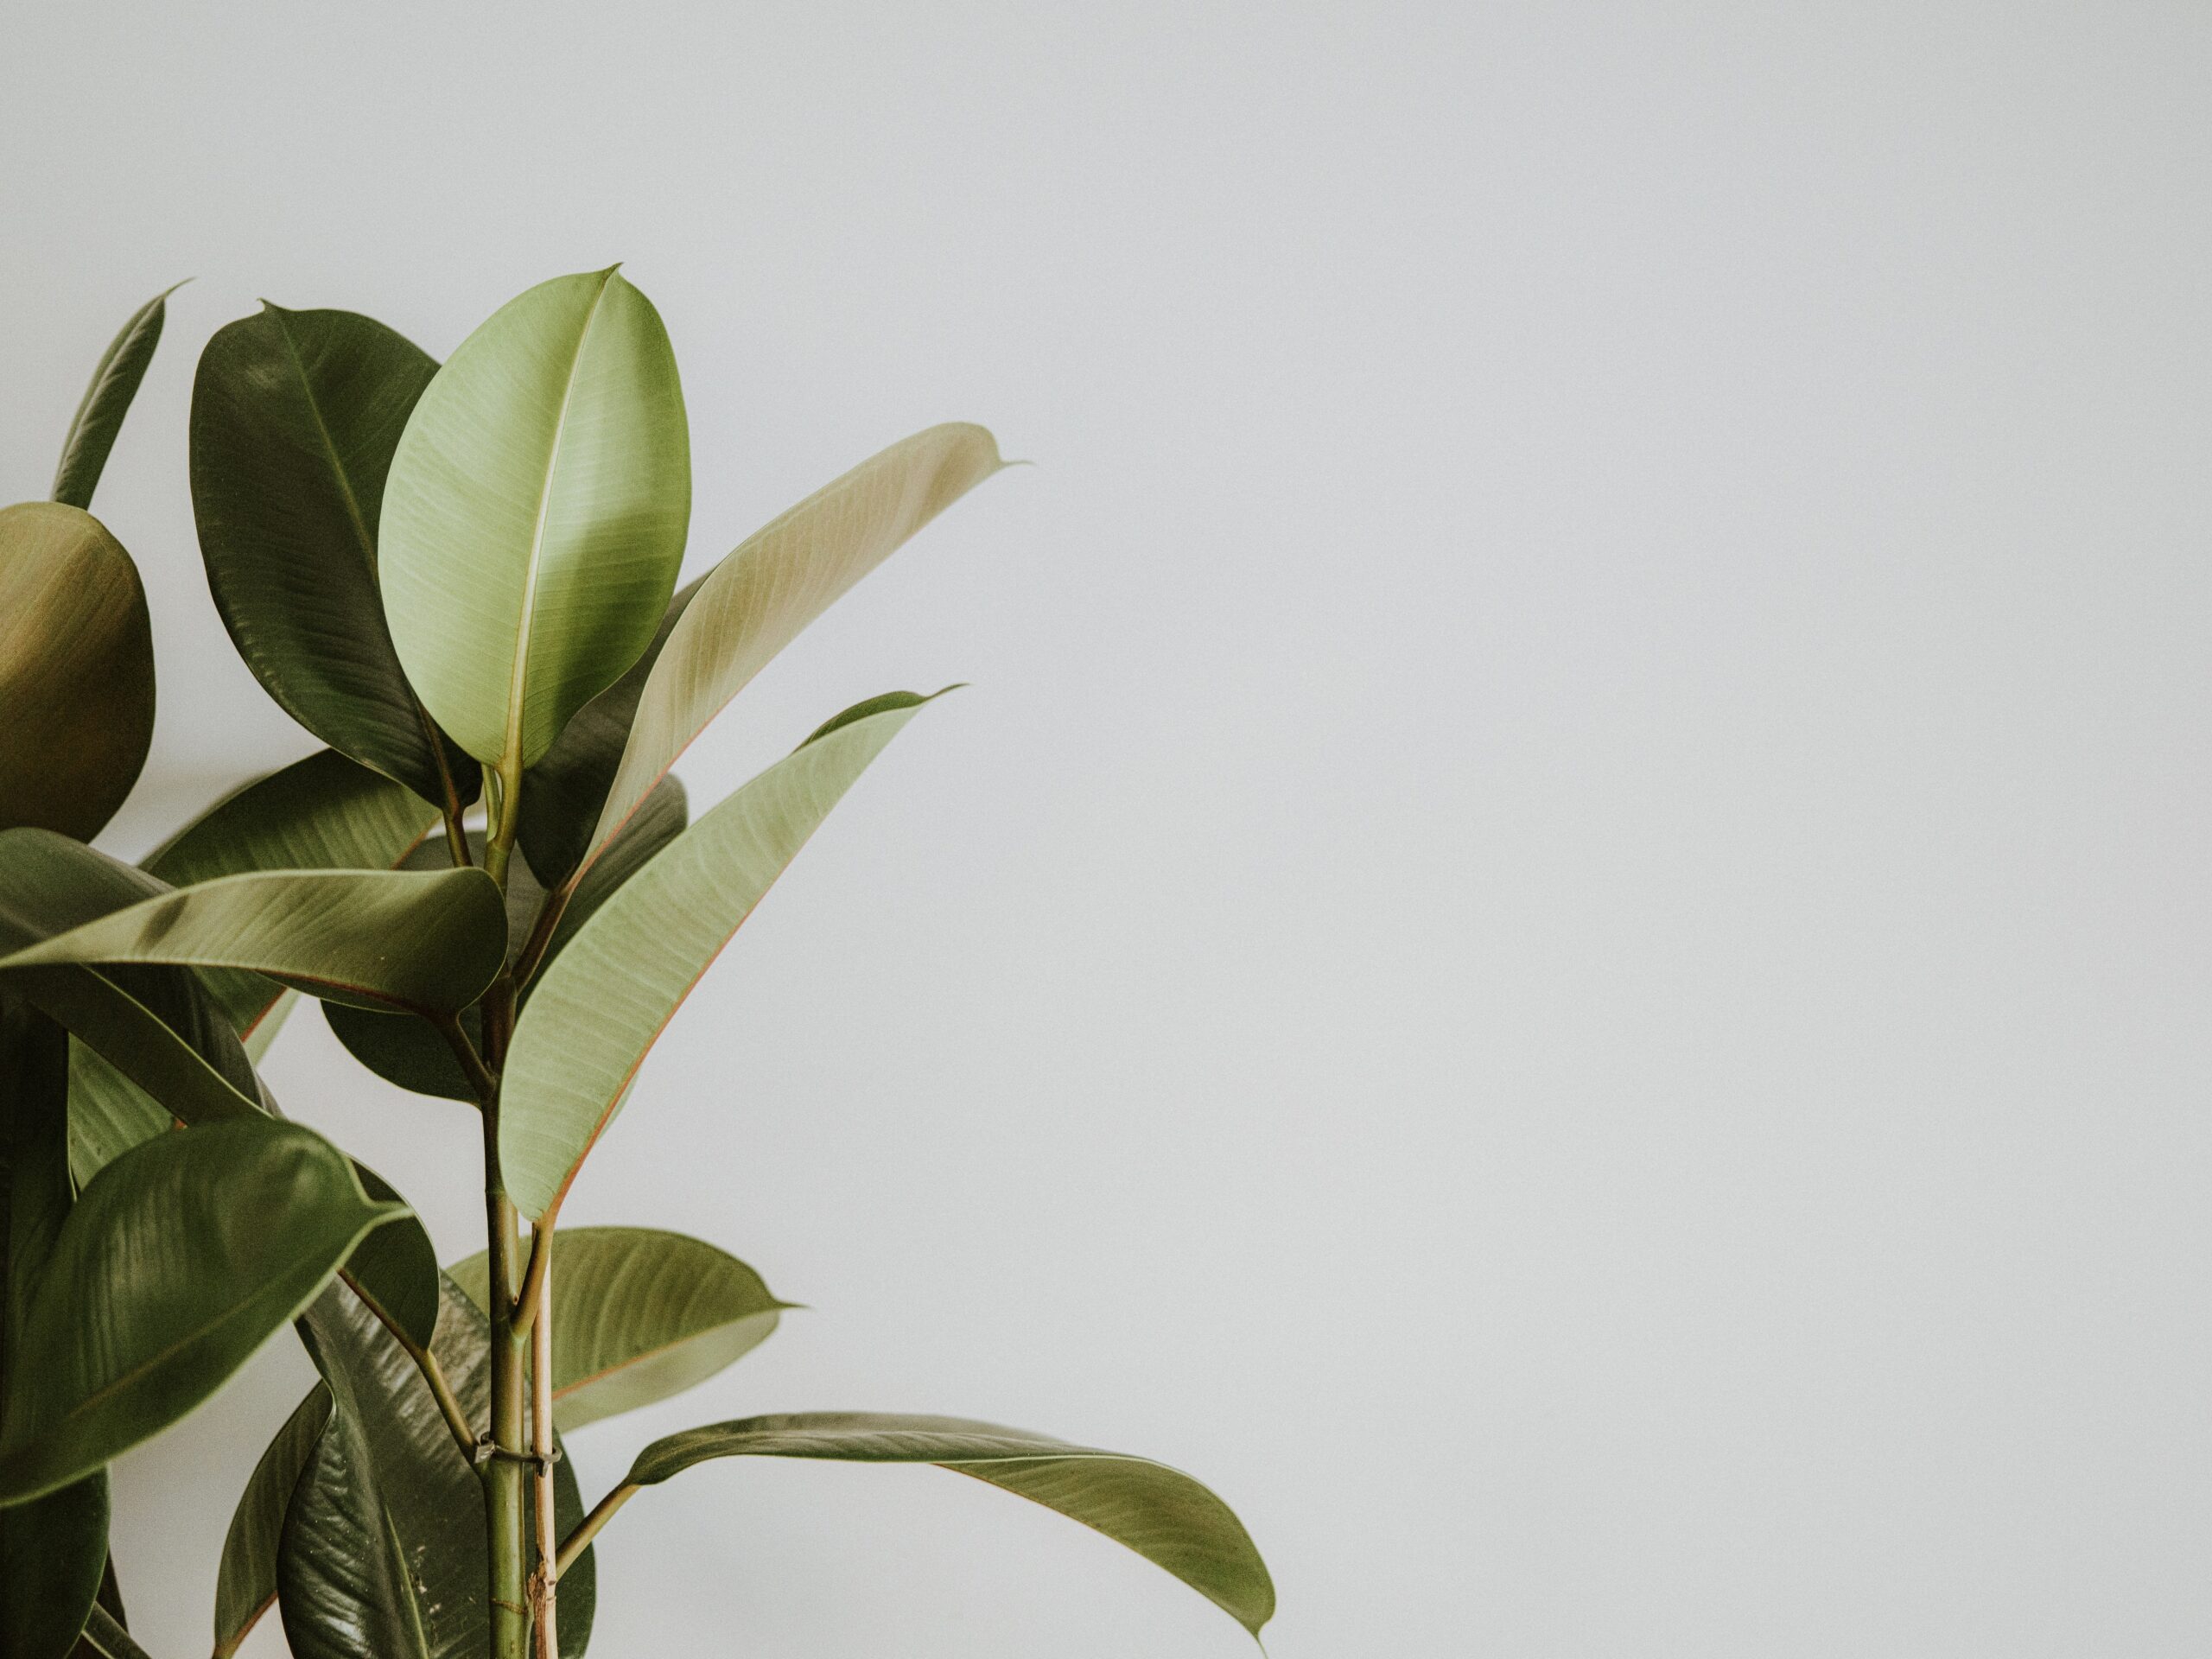 A rubber plant makes the perfect addition to your home. This indoor tree grows and thrives in low light and requires a moist soil. Pictured: A rubber plant or Ficus Elastica tree.